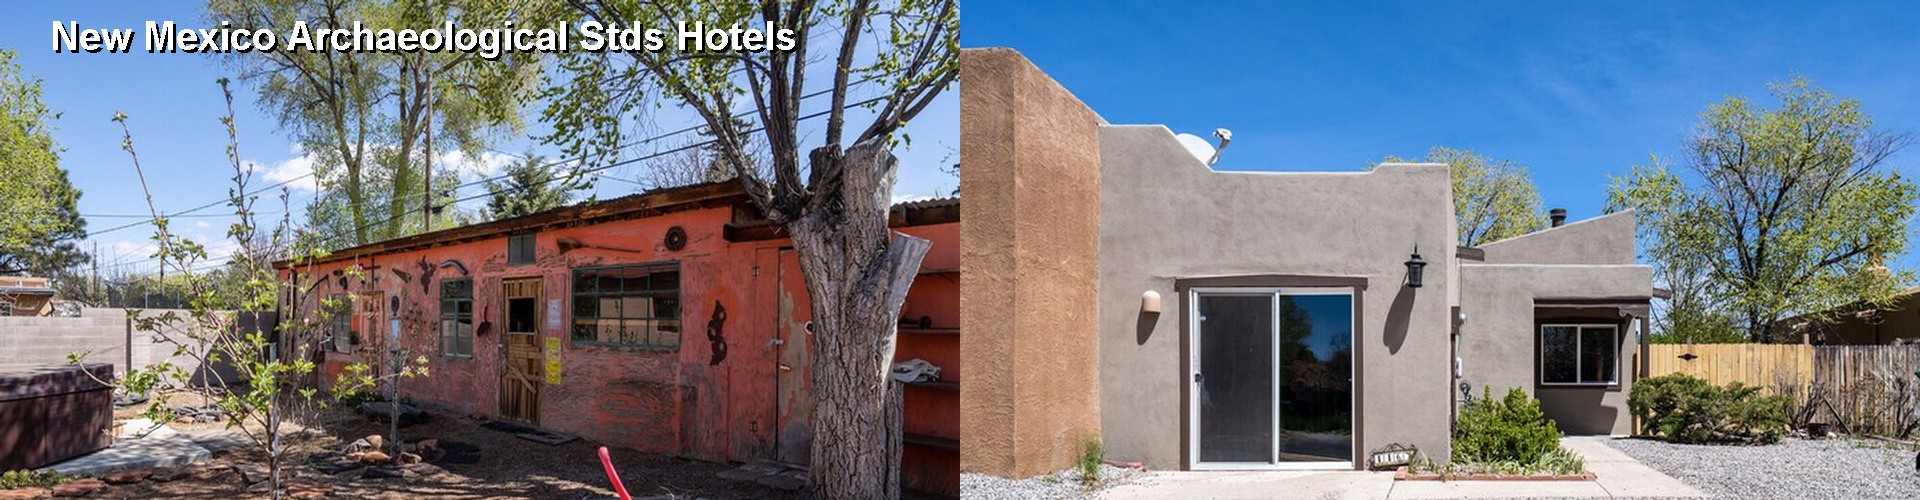 5 Best Hotels near New Mexico Archaeological Stds